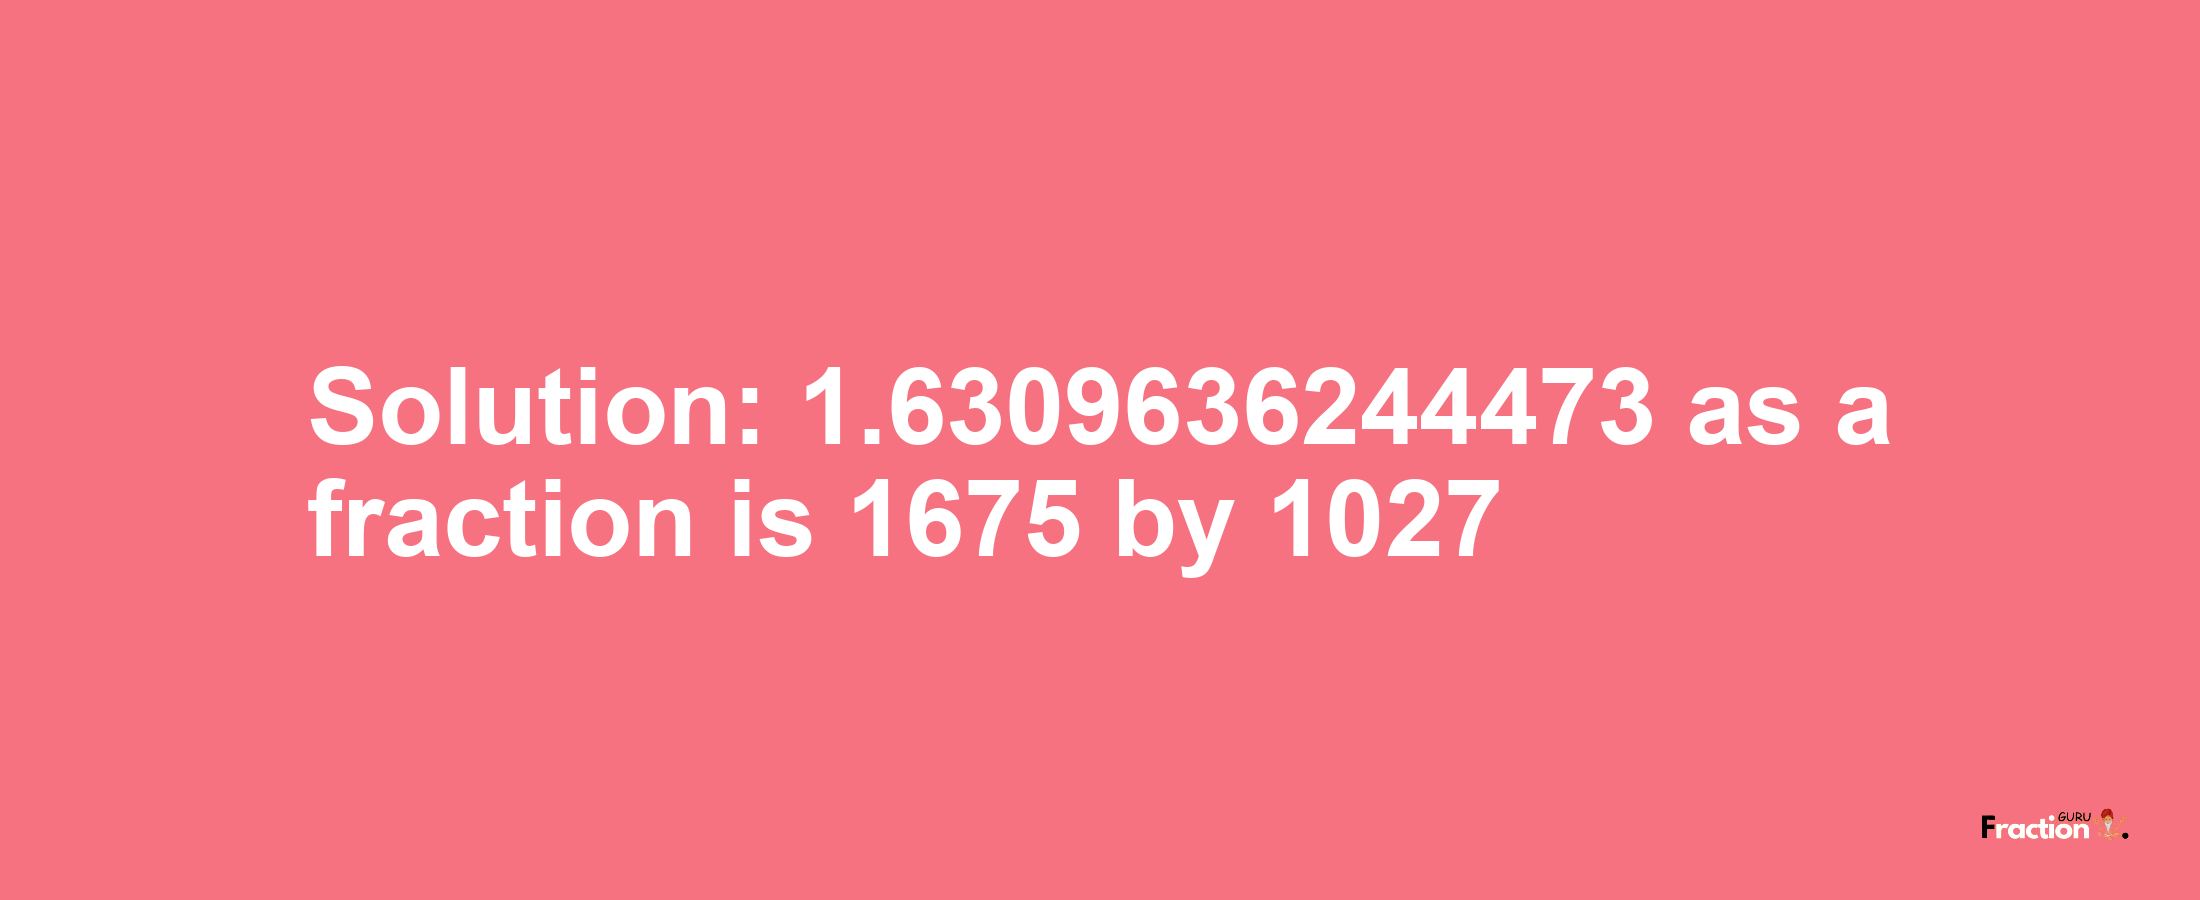 Solution:1.6309636244473 as a fraction is 1675/1027